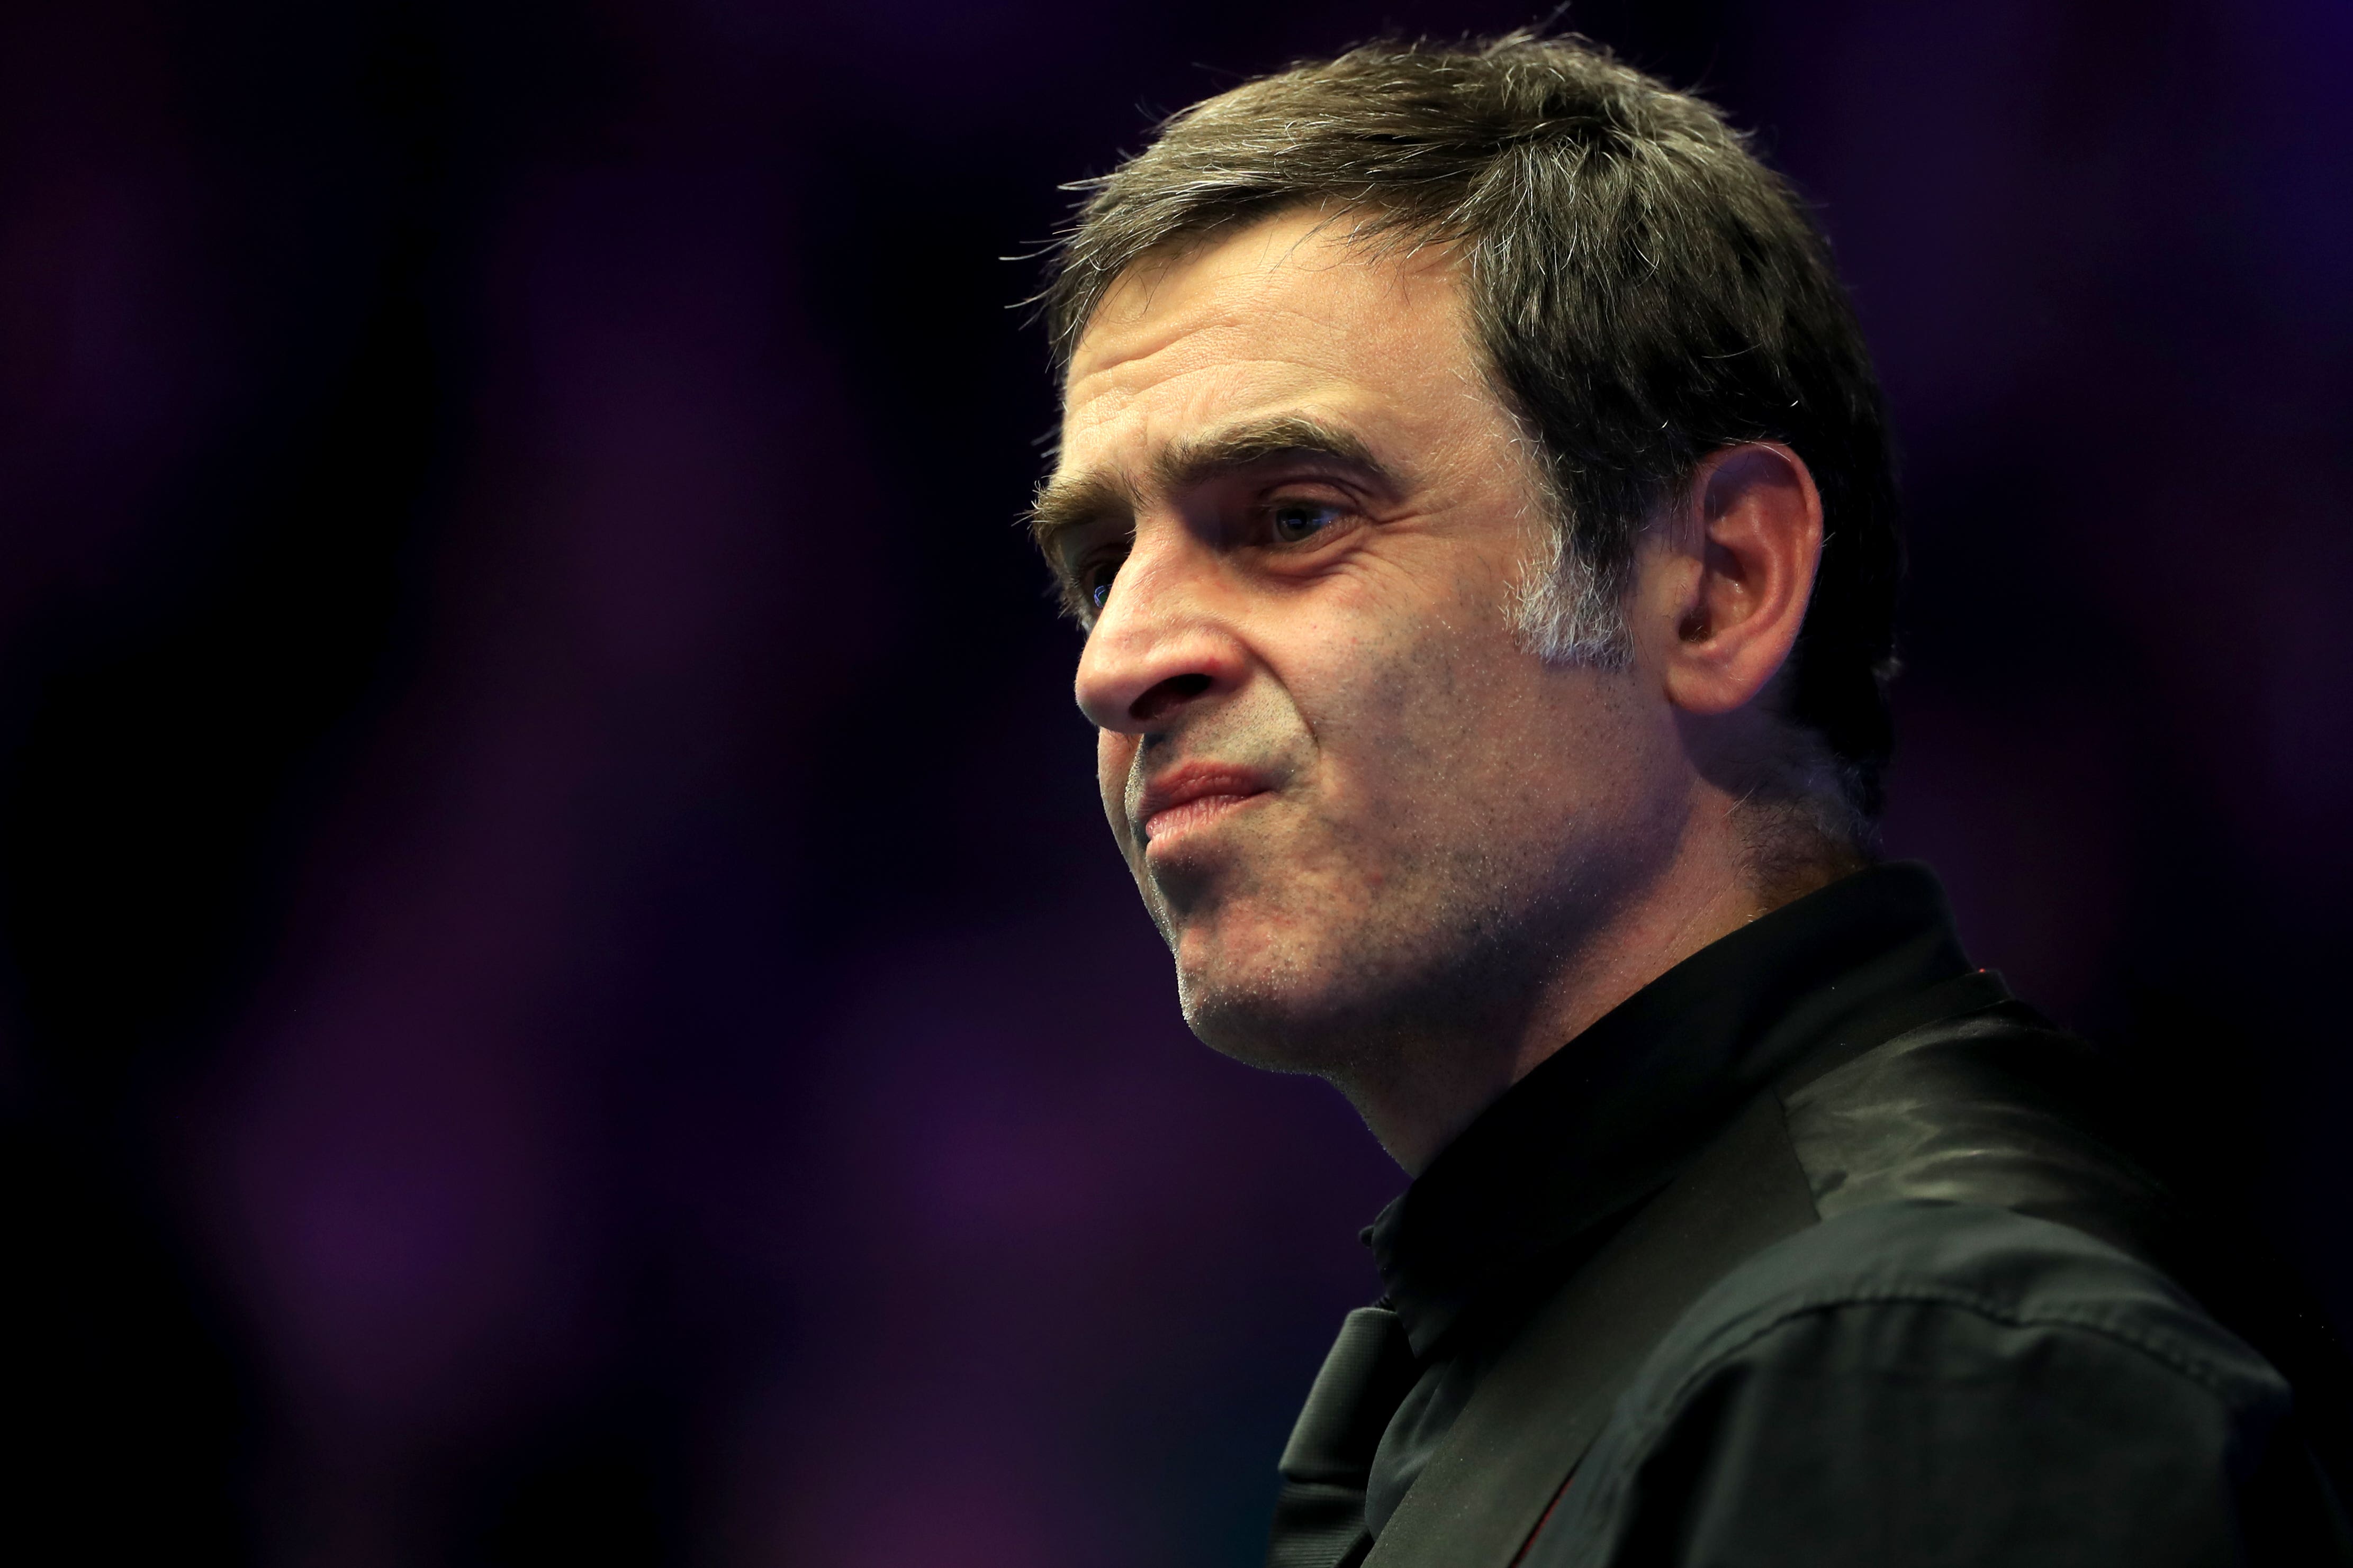 Ronnie O’Sullivan suggested that players were afraid to speak out against the sport